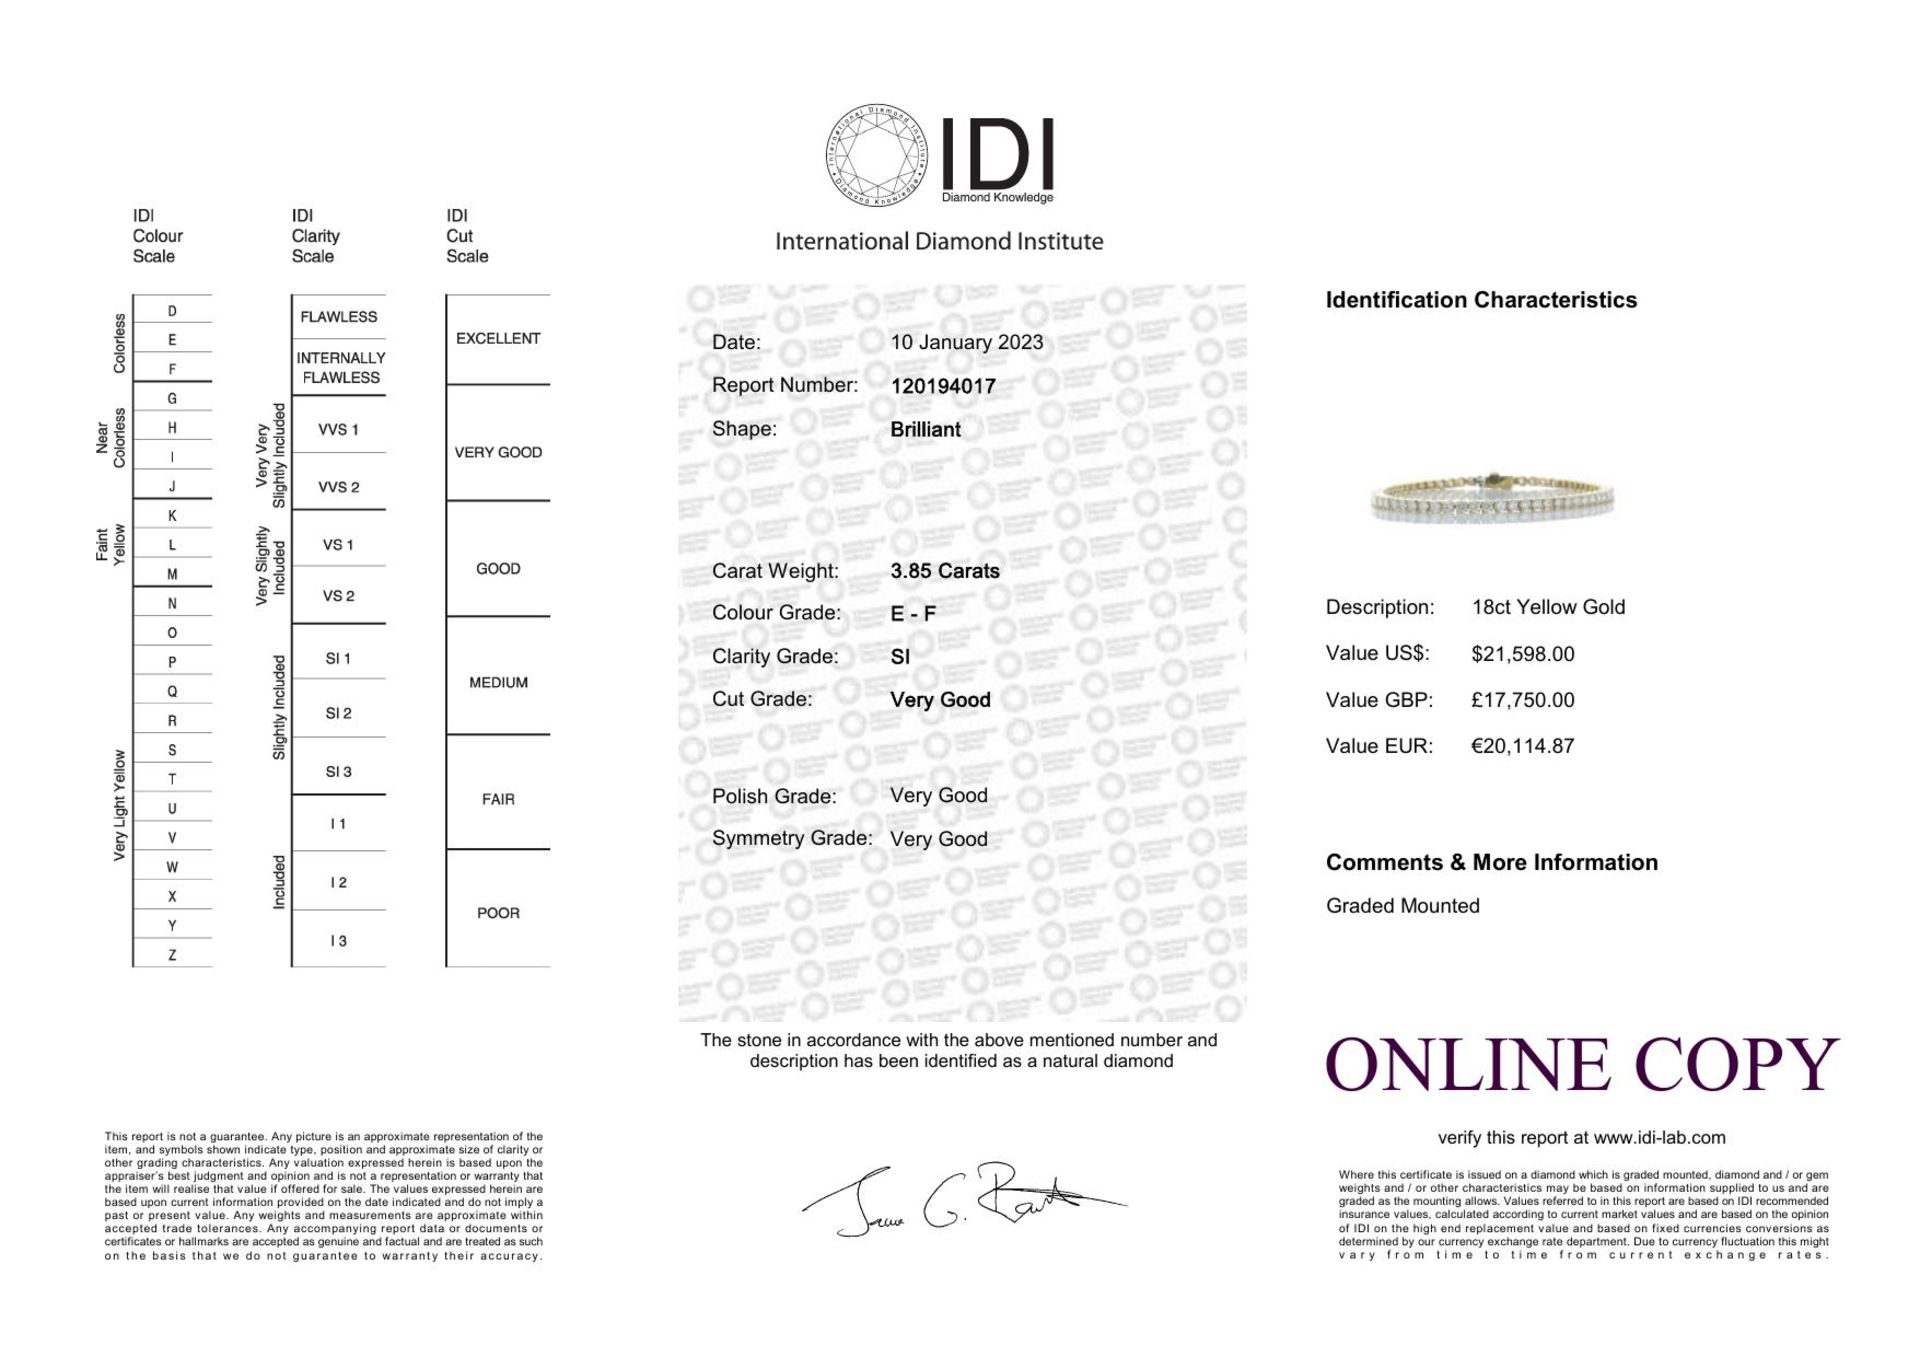 18ct Yellow Gold Tennis Diamond Bracelet 3.85 Carats - Valued By IDI £17,750.00 - Sixty four round - Image 5 of 5